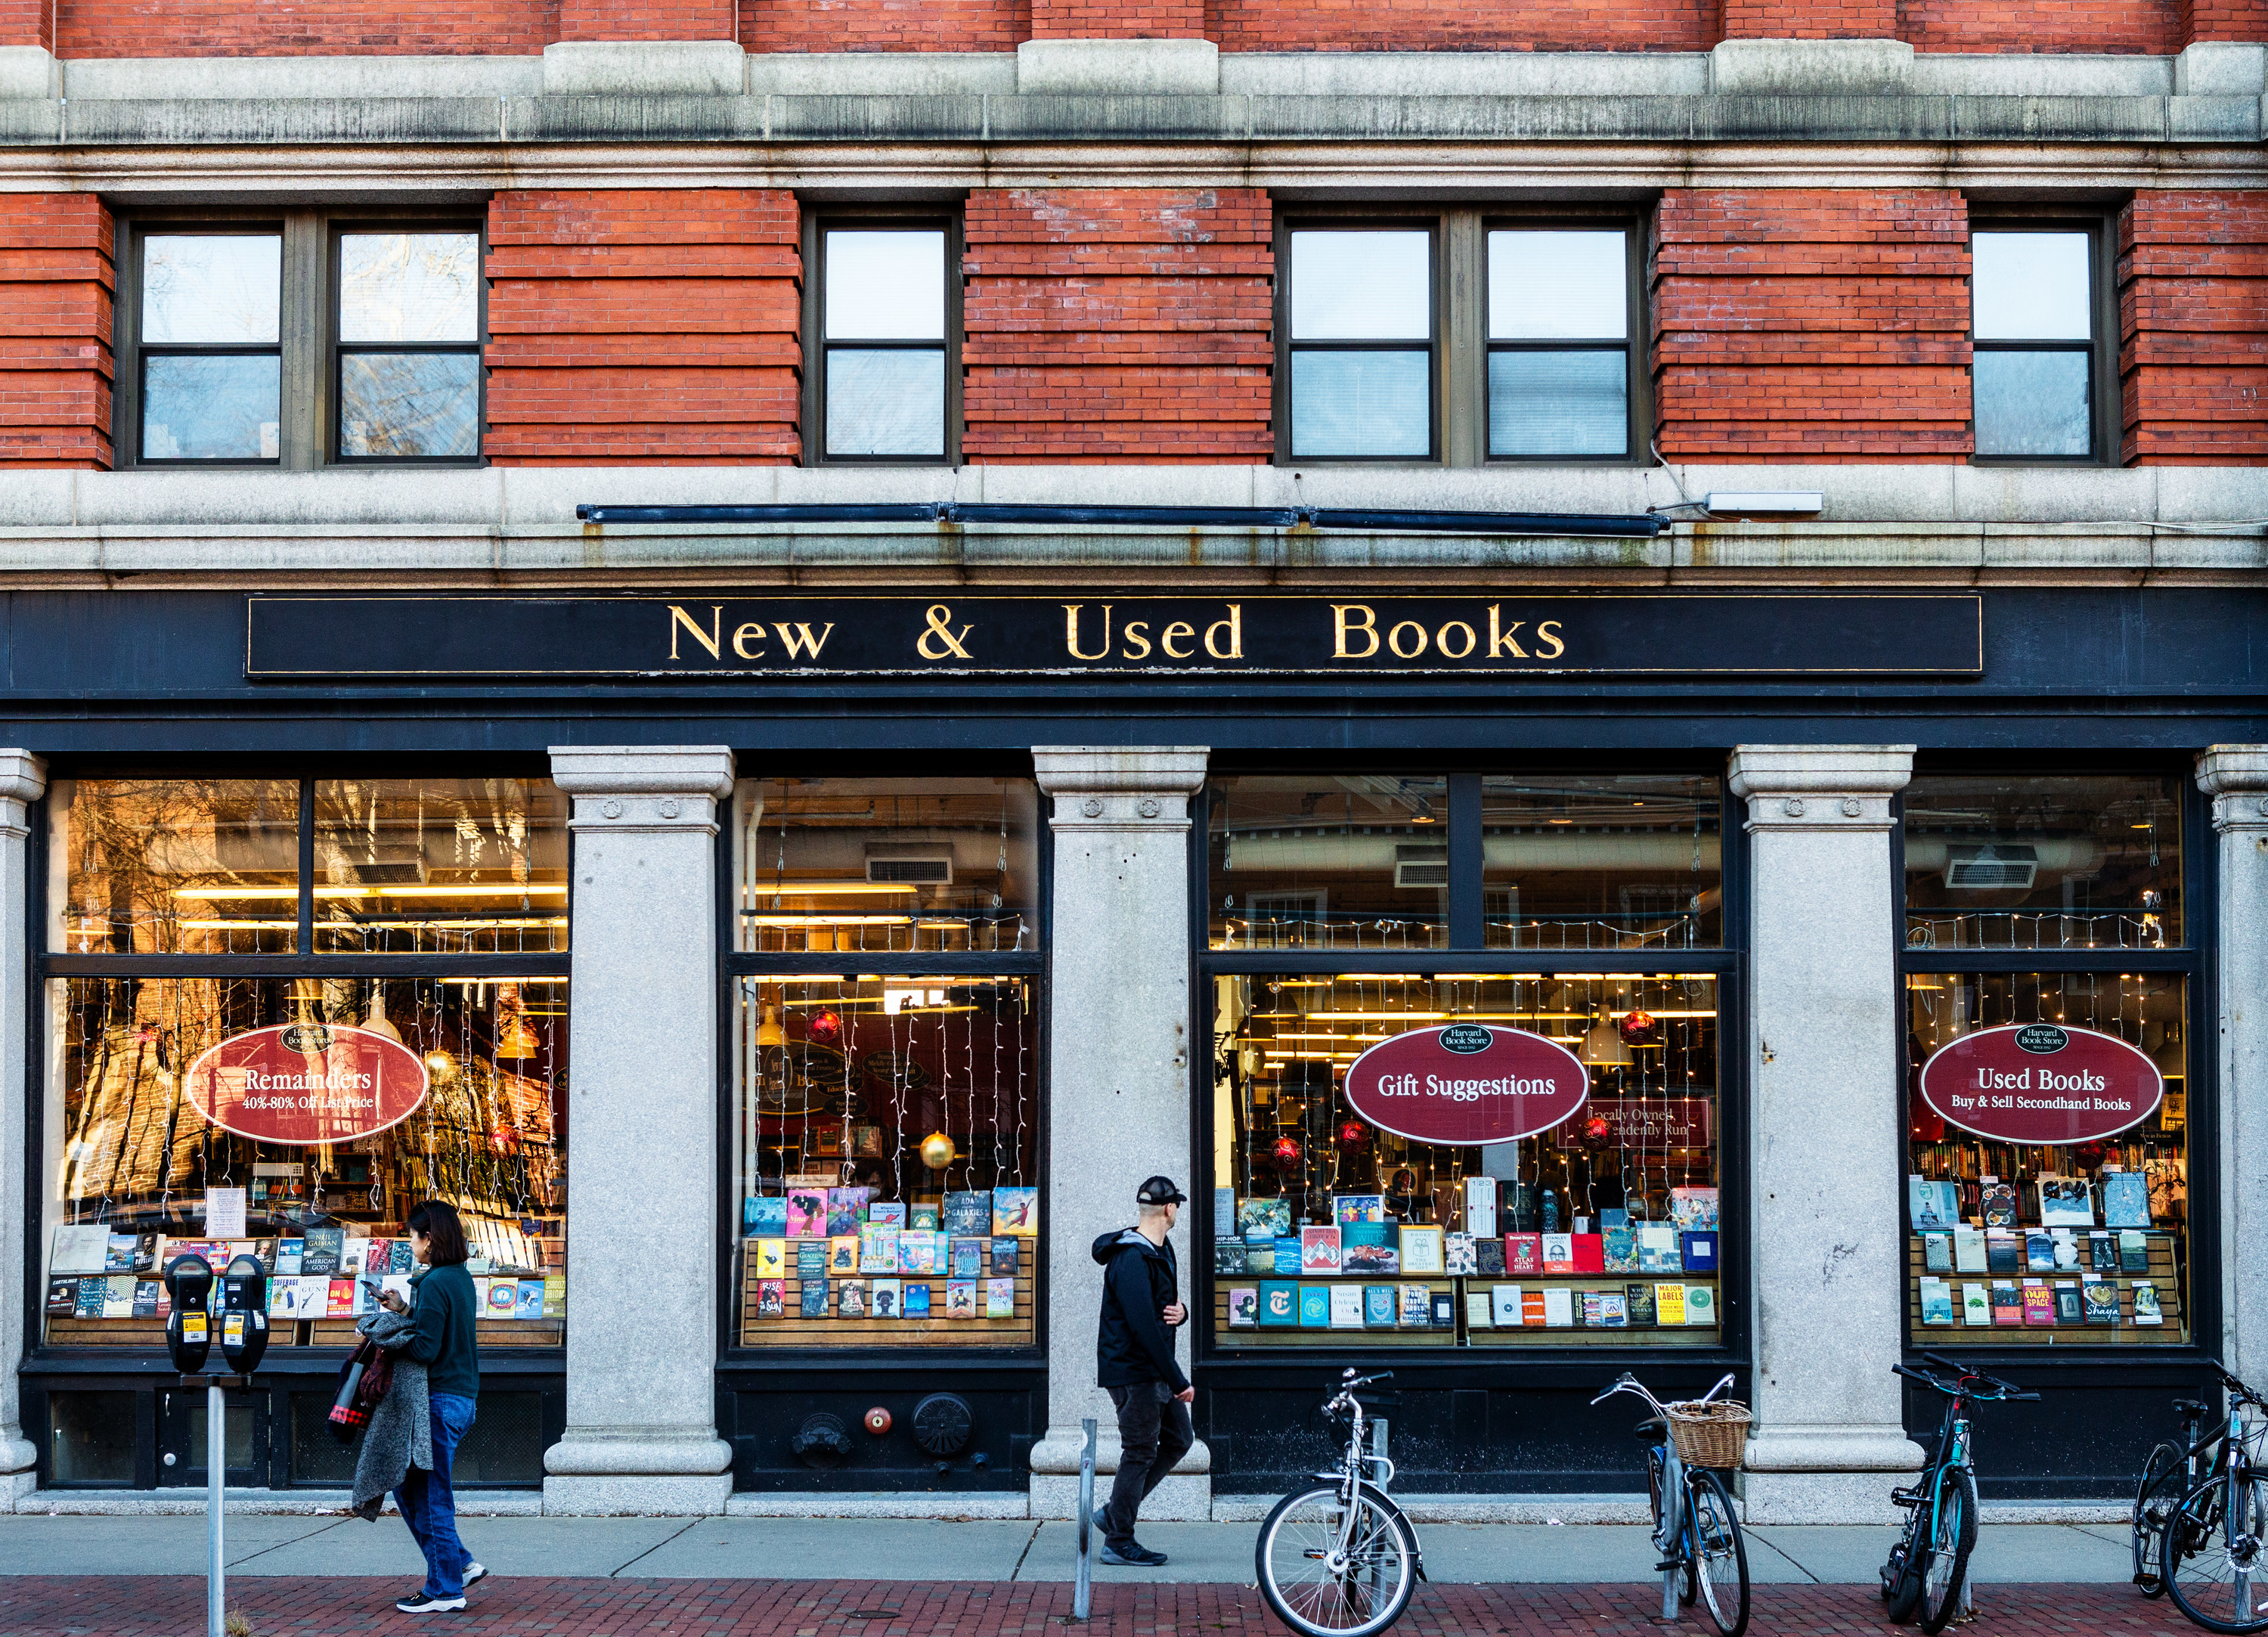 Pedestrians pass by a new and used bookstore